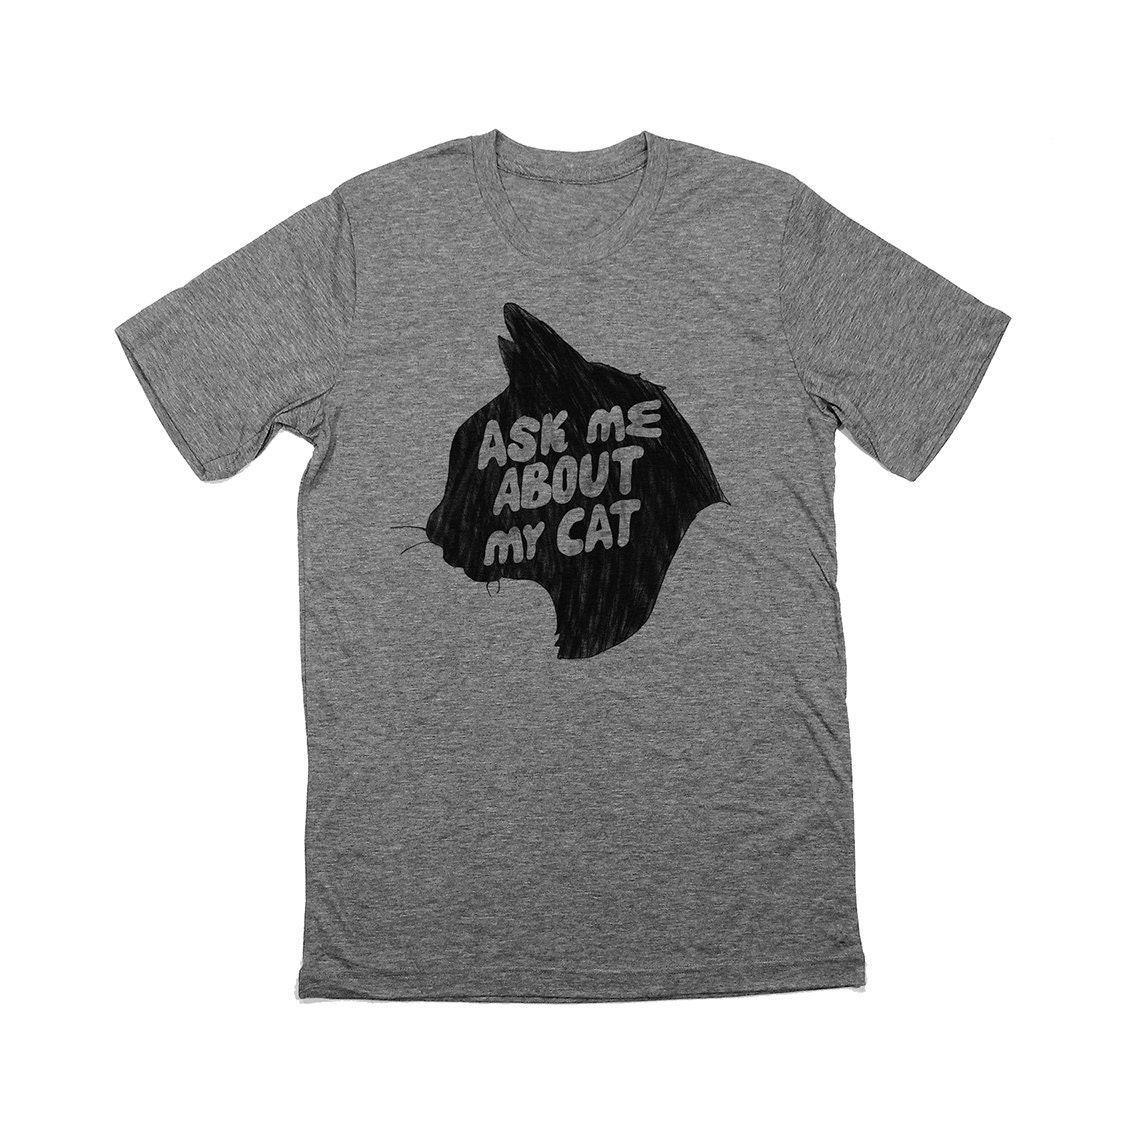 ASK ME ABOUT My Cat shirt. heather grey. kitty t-shirt.